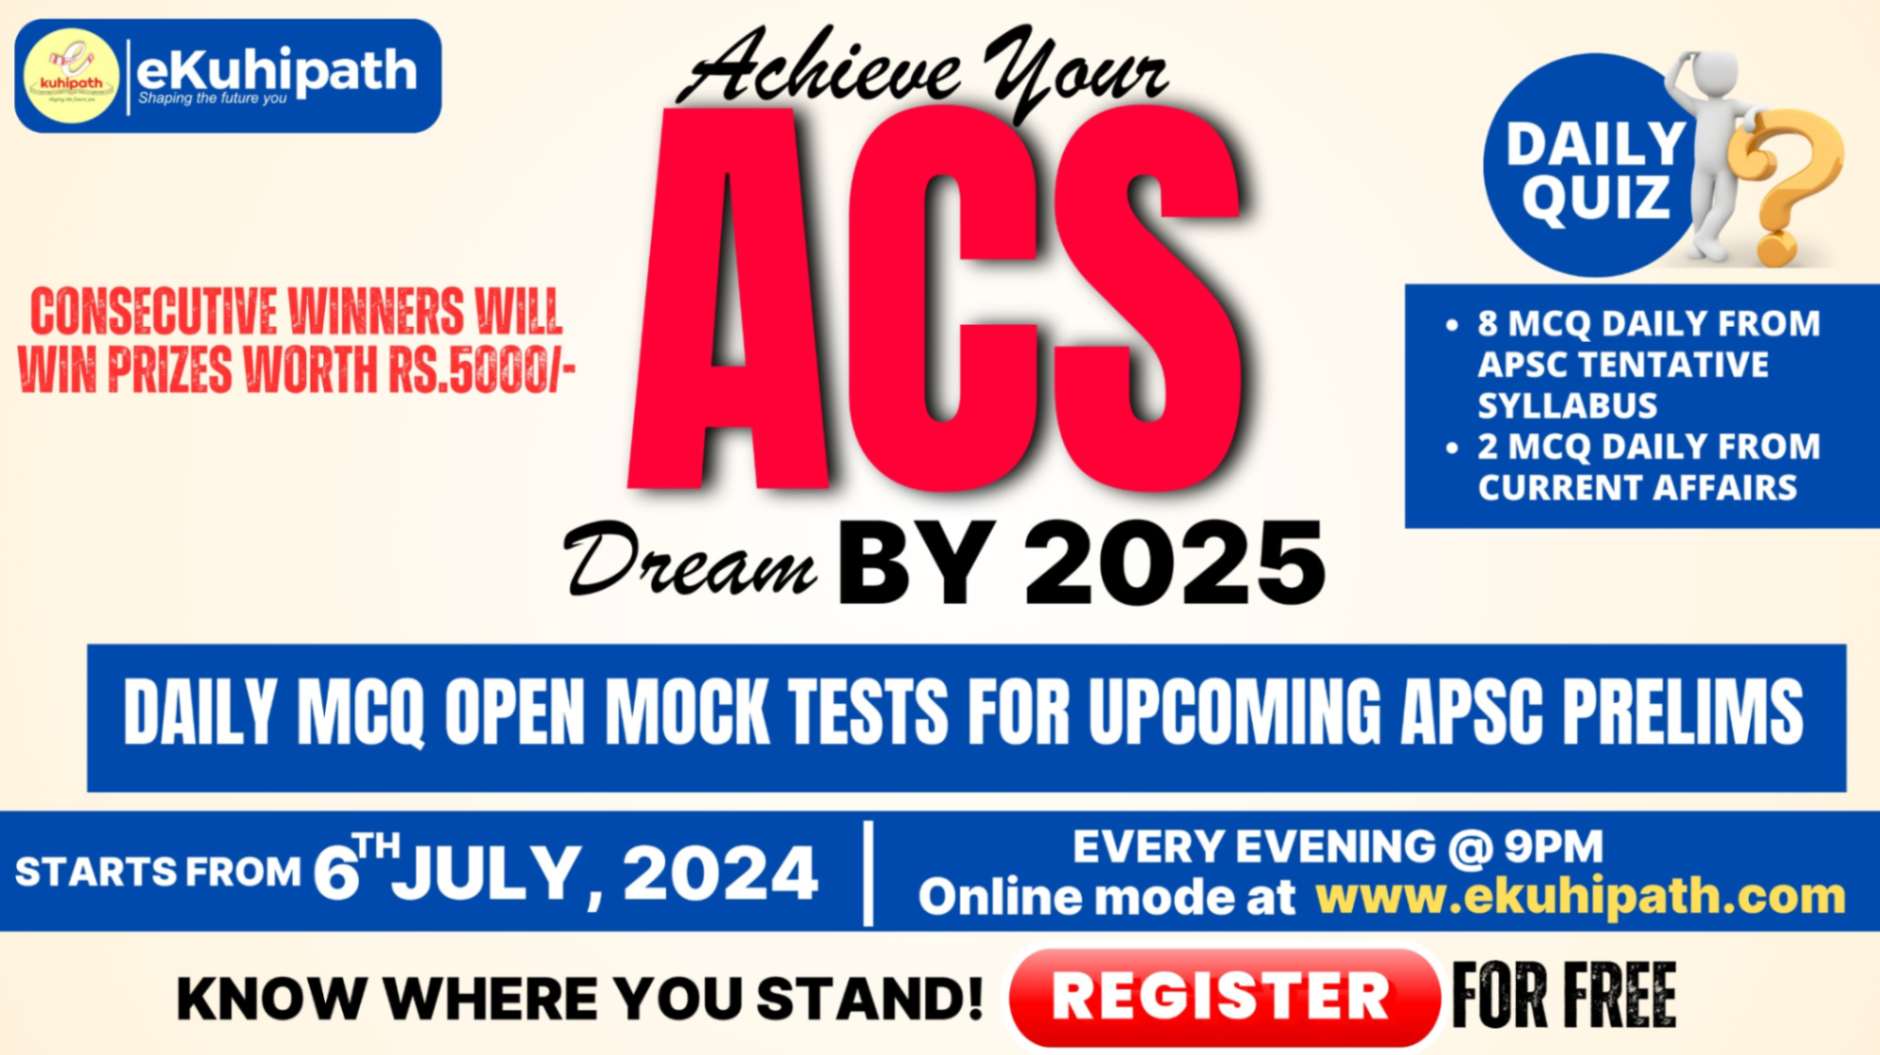 APSC CCE Prelims Daily MCQ Open Mock Test Series